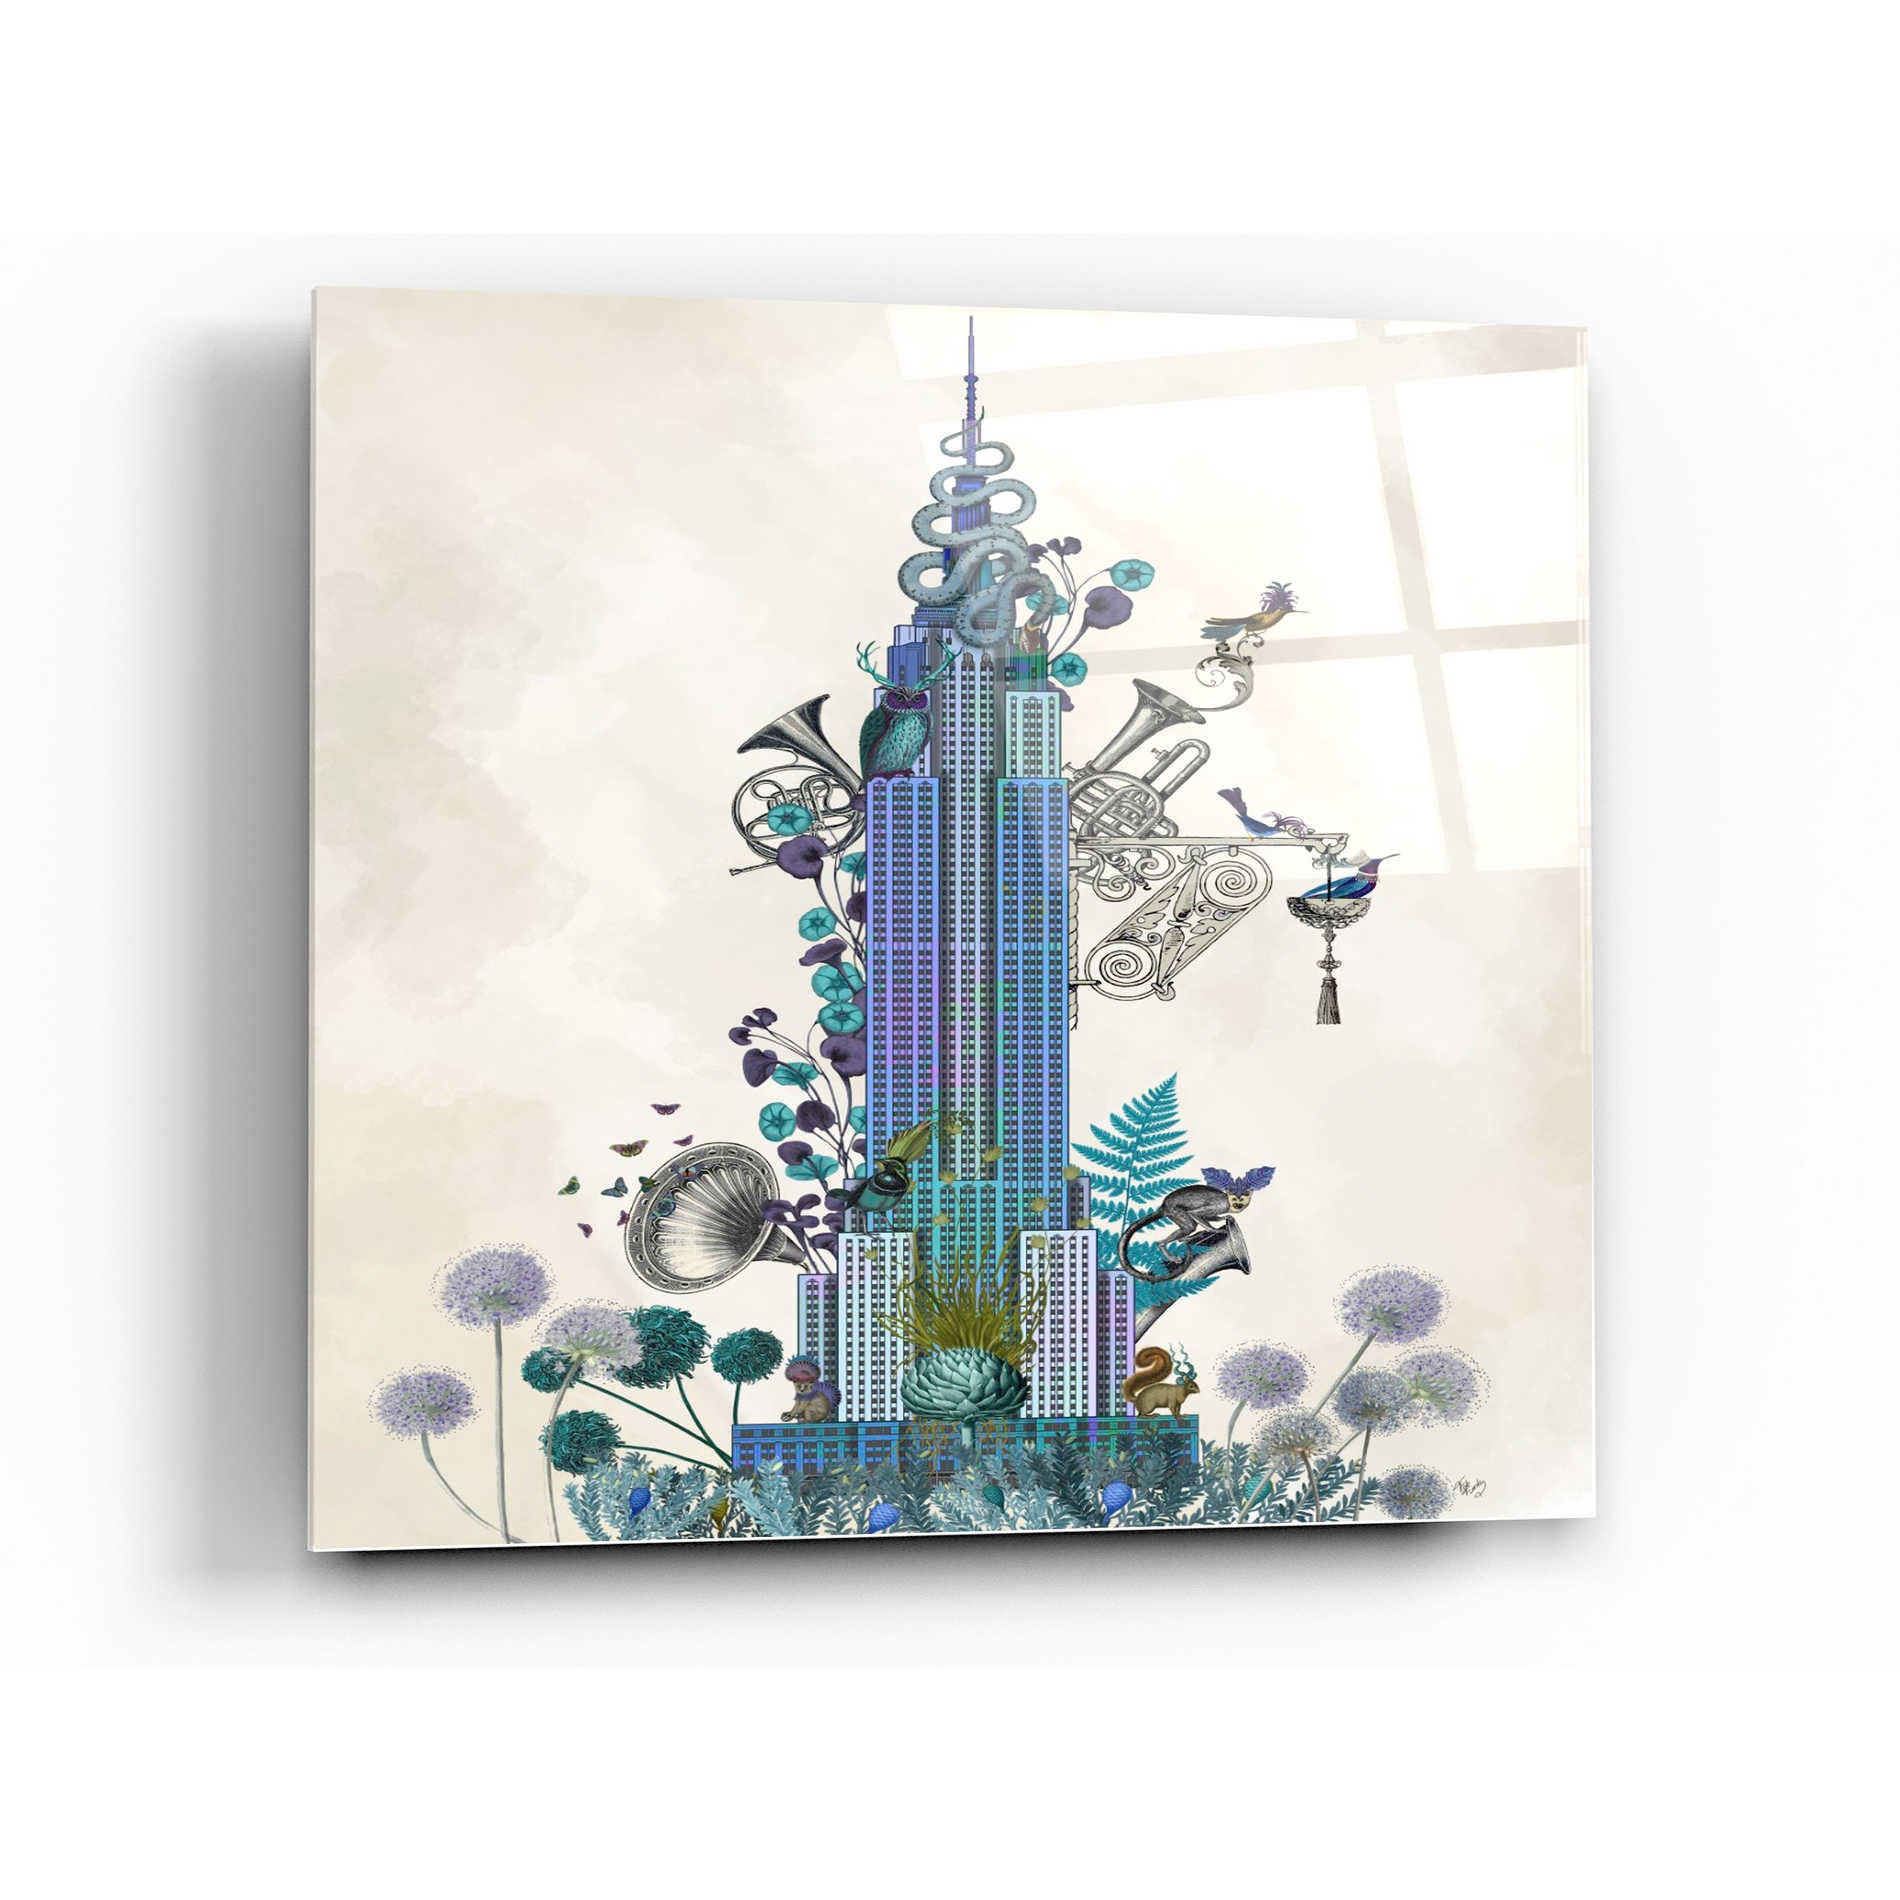 Epic Art 'New York Empire State Building, Menagerie' by Fab Funky Acrylic Glass Wall Art,24x24